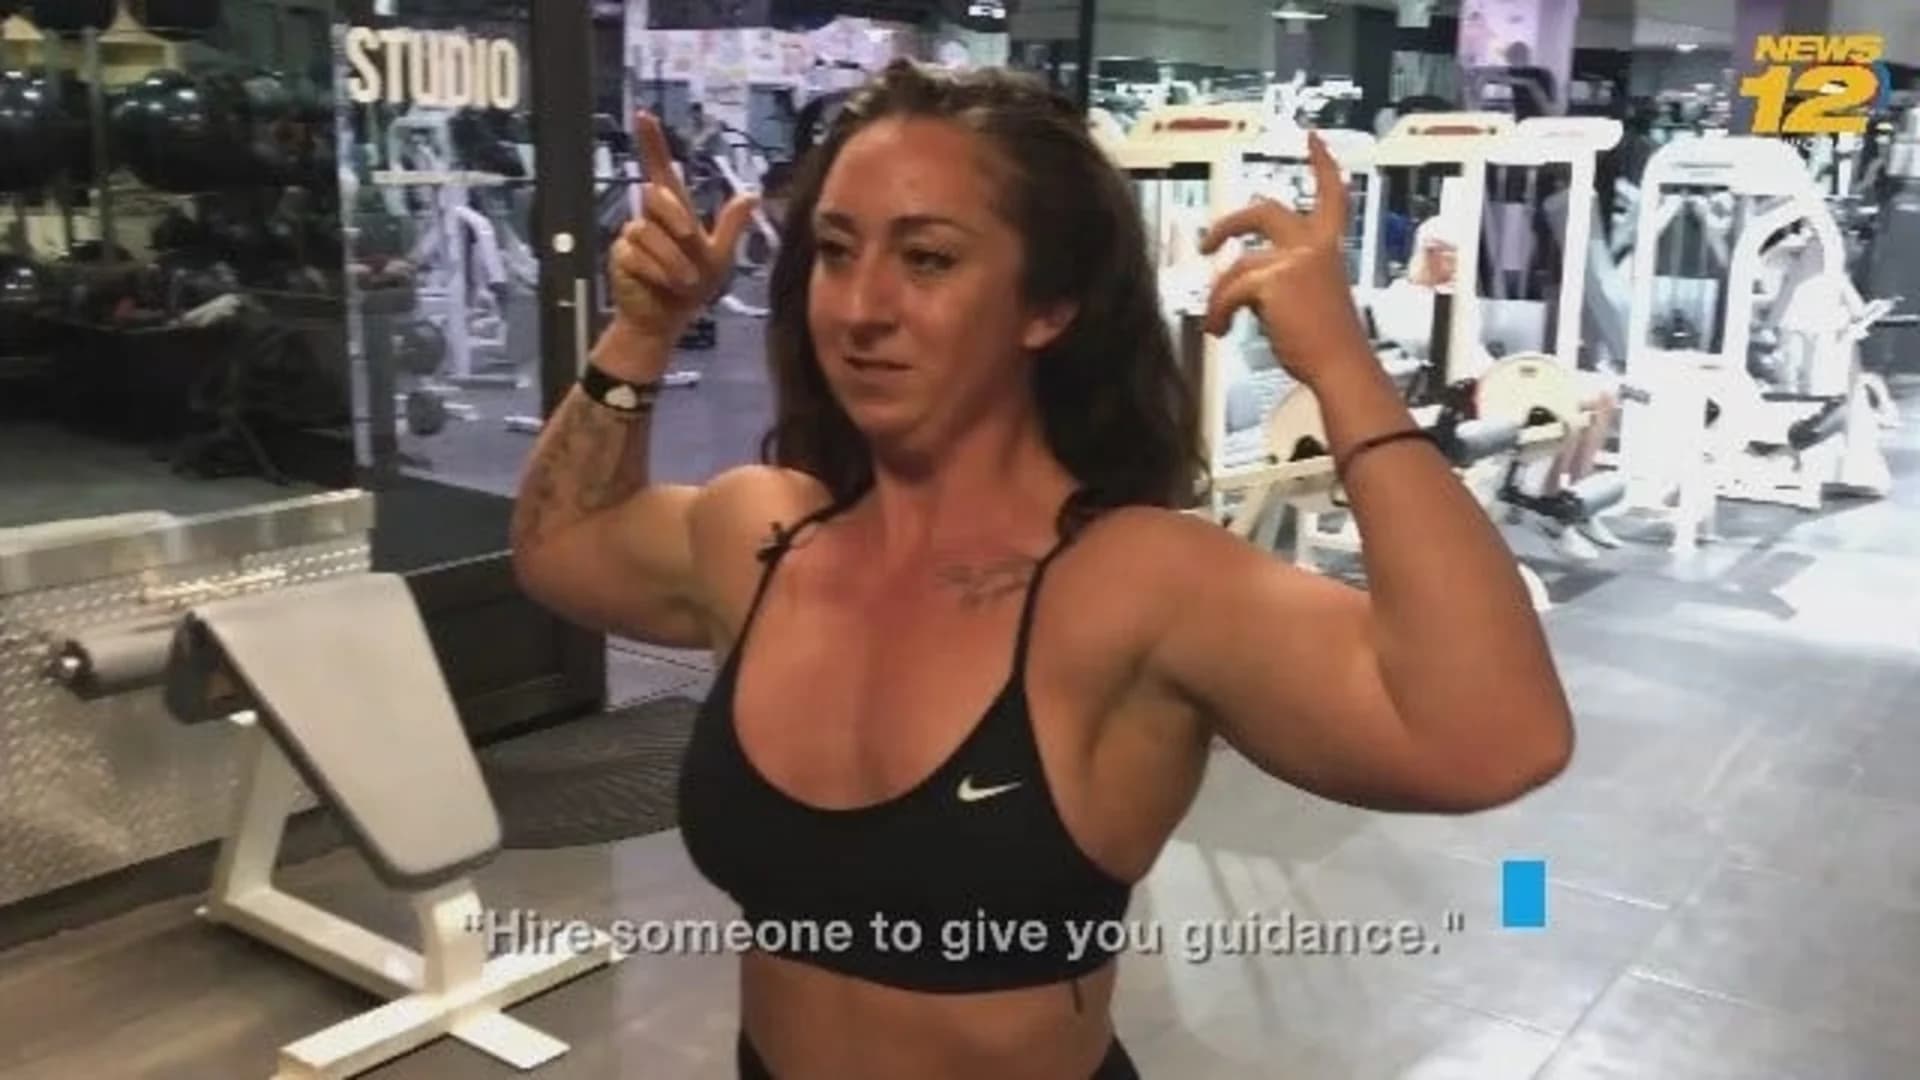 ‘Pick up the weights’: Bodybuilder offers advice on improving strength